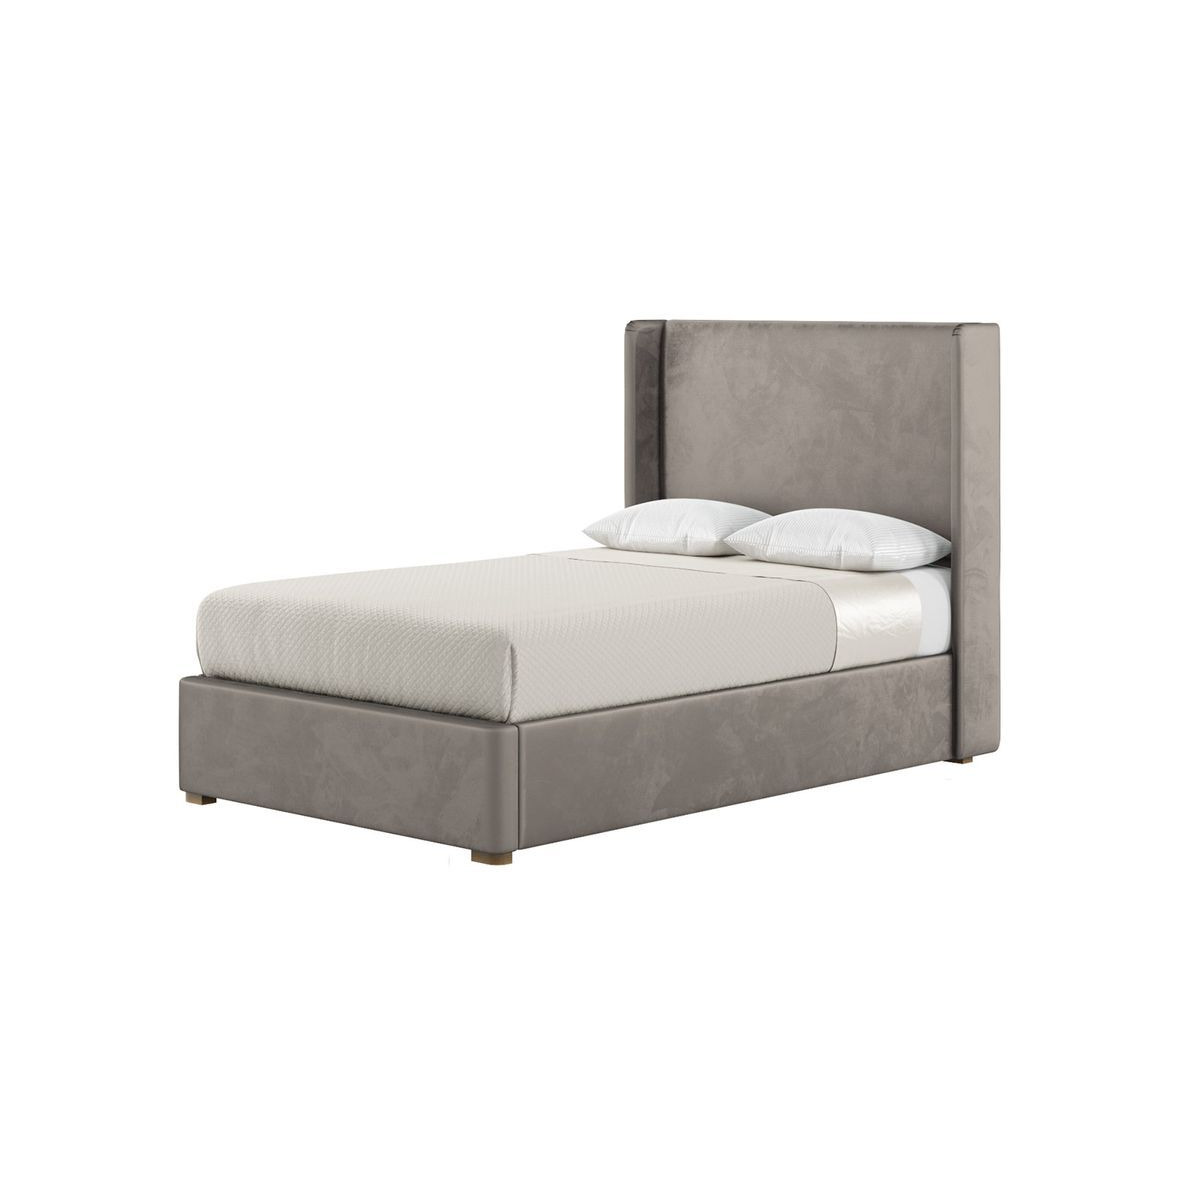 Darcy 4ft Small Double Bed Frame With Modern Smooth Wing Headboard, grey, Leg colour: wax black - image 1